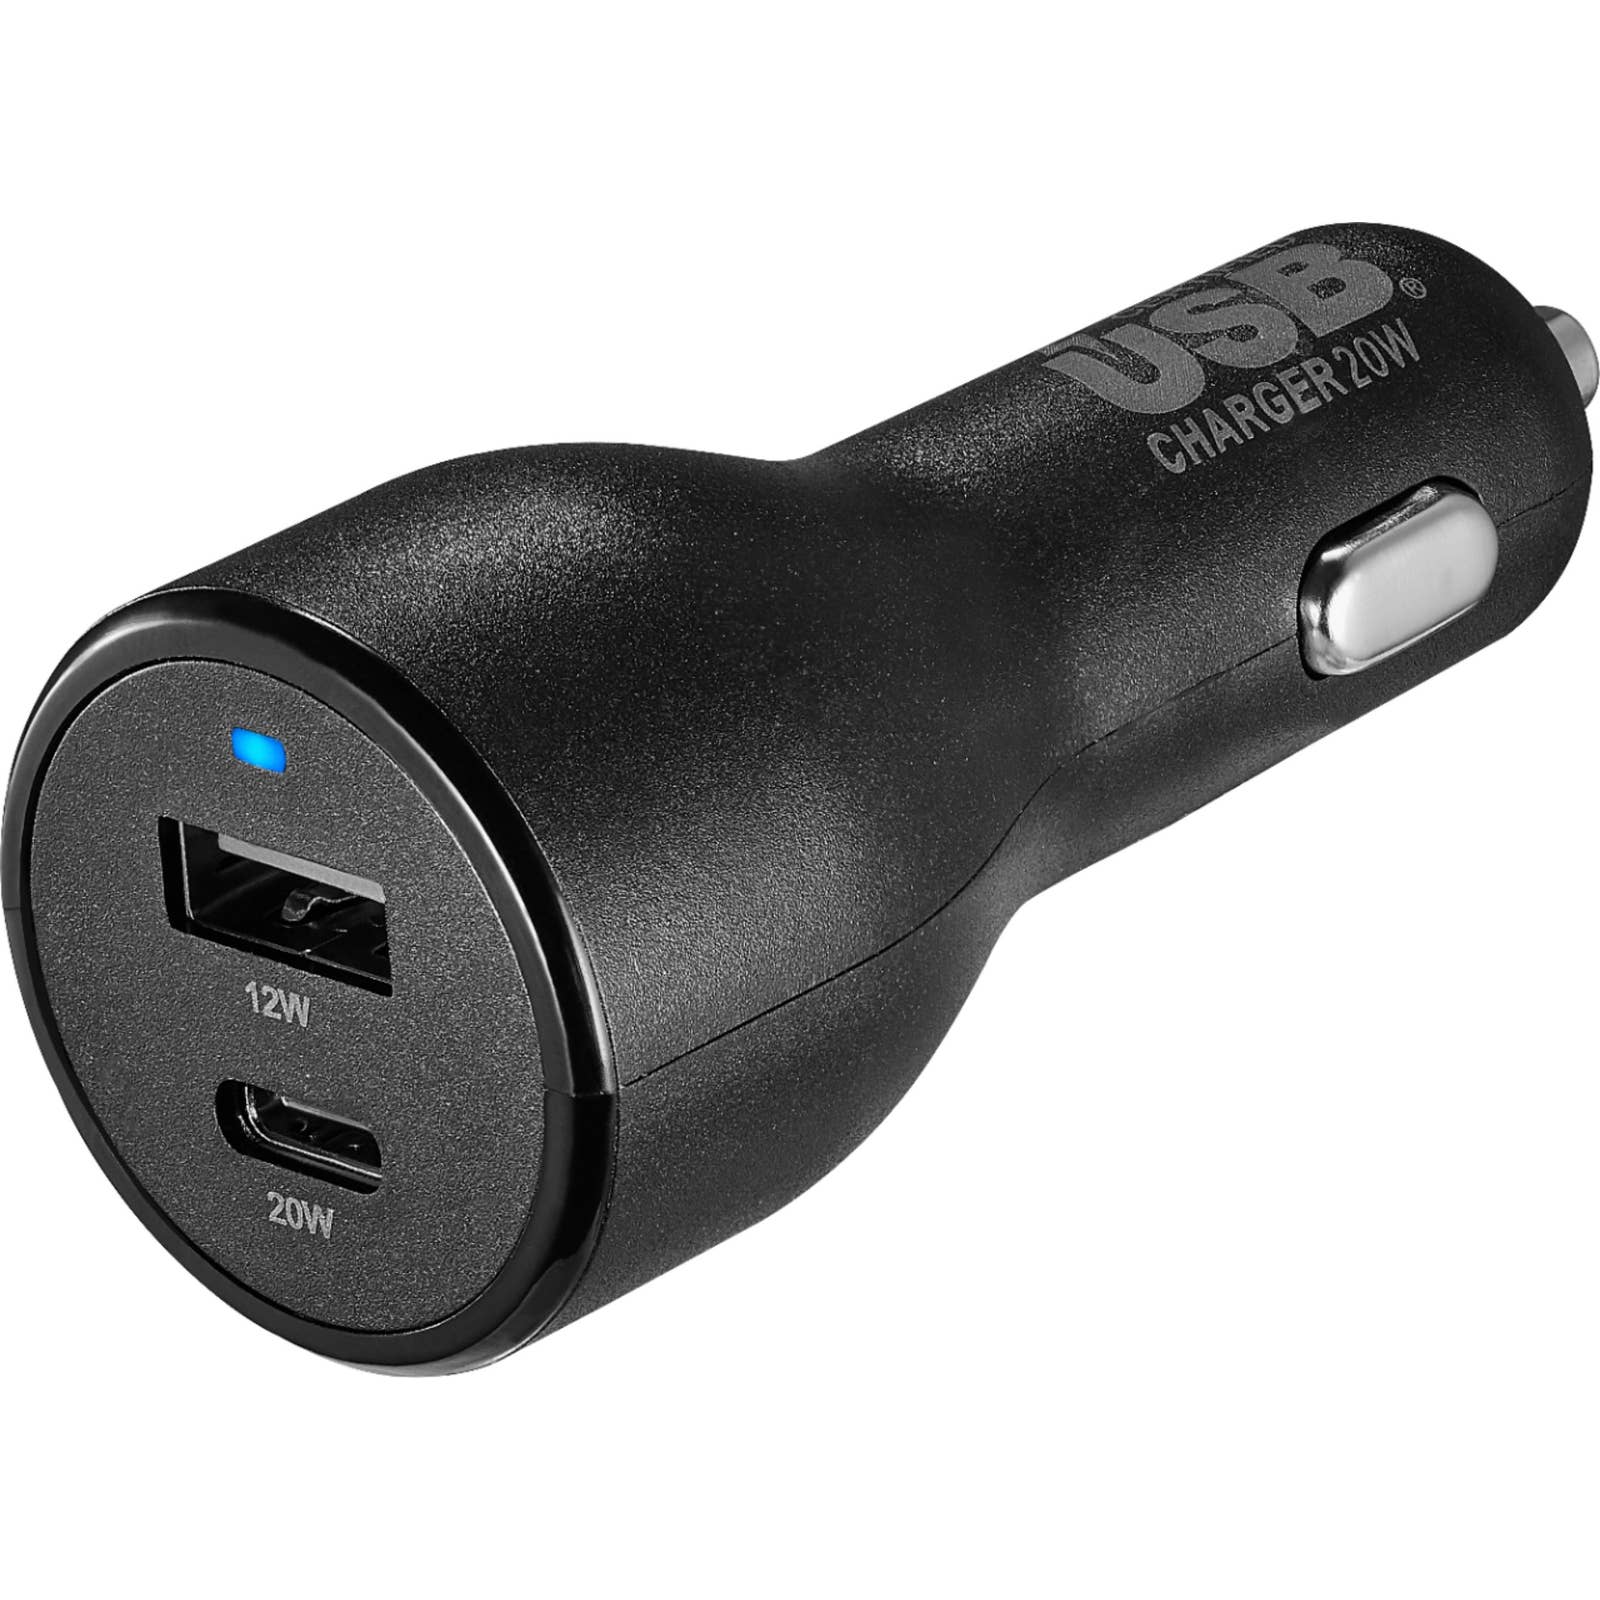 Best Buy essentials™ - BE-MVC32W22K 32 W Vehicle Charger with 1 USB-C & 1 USB Port - Black